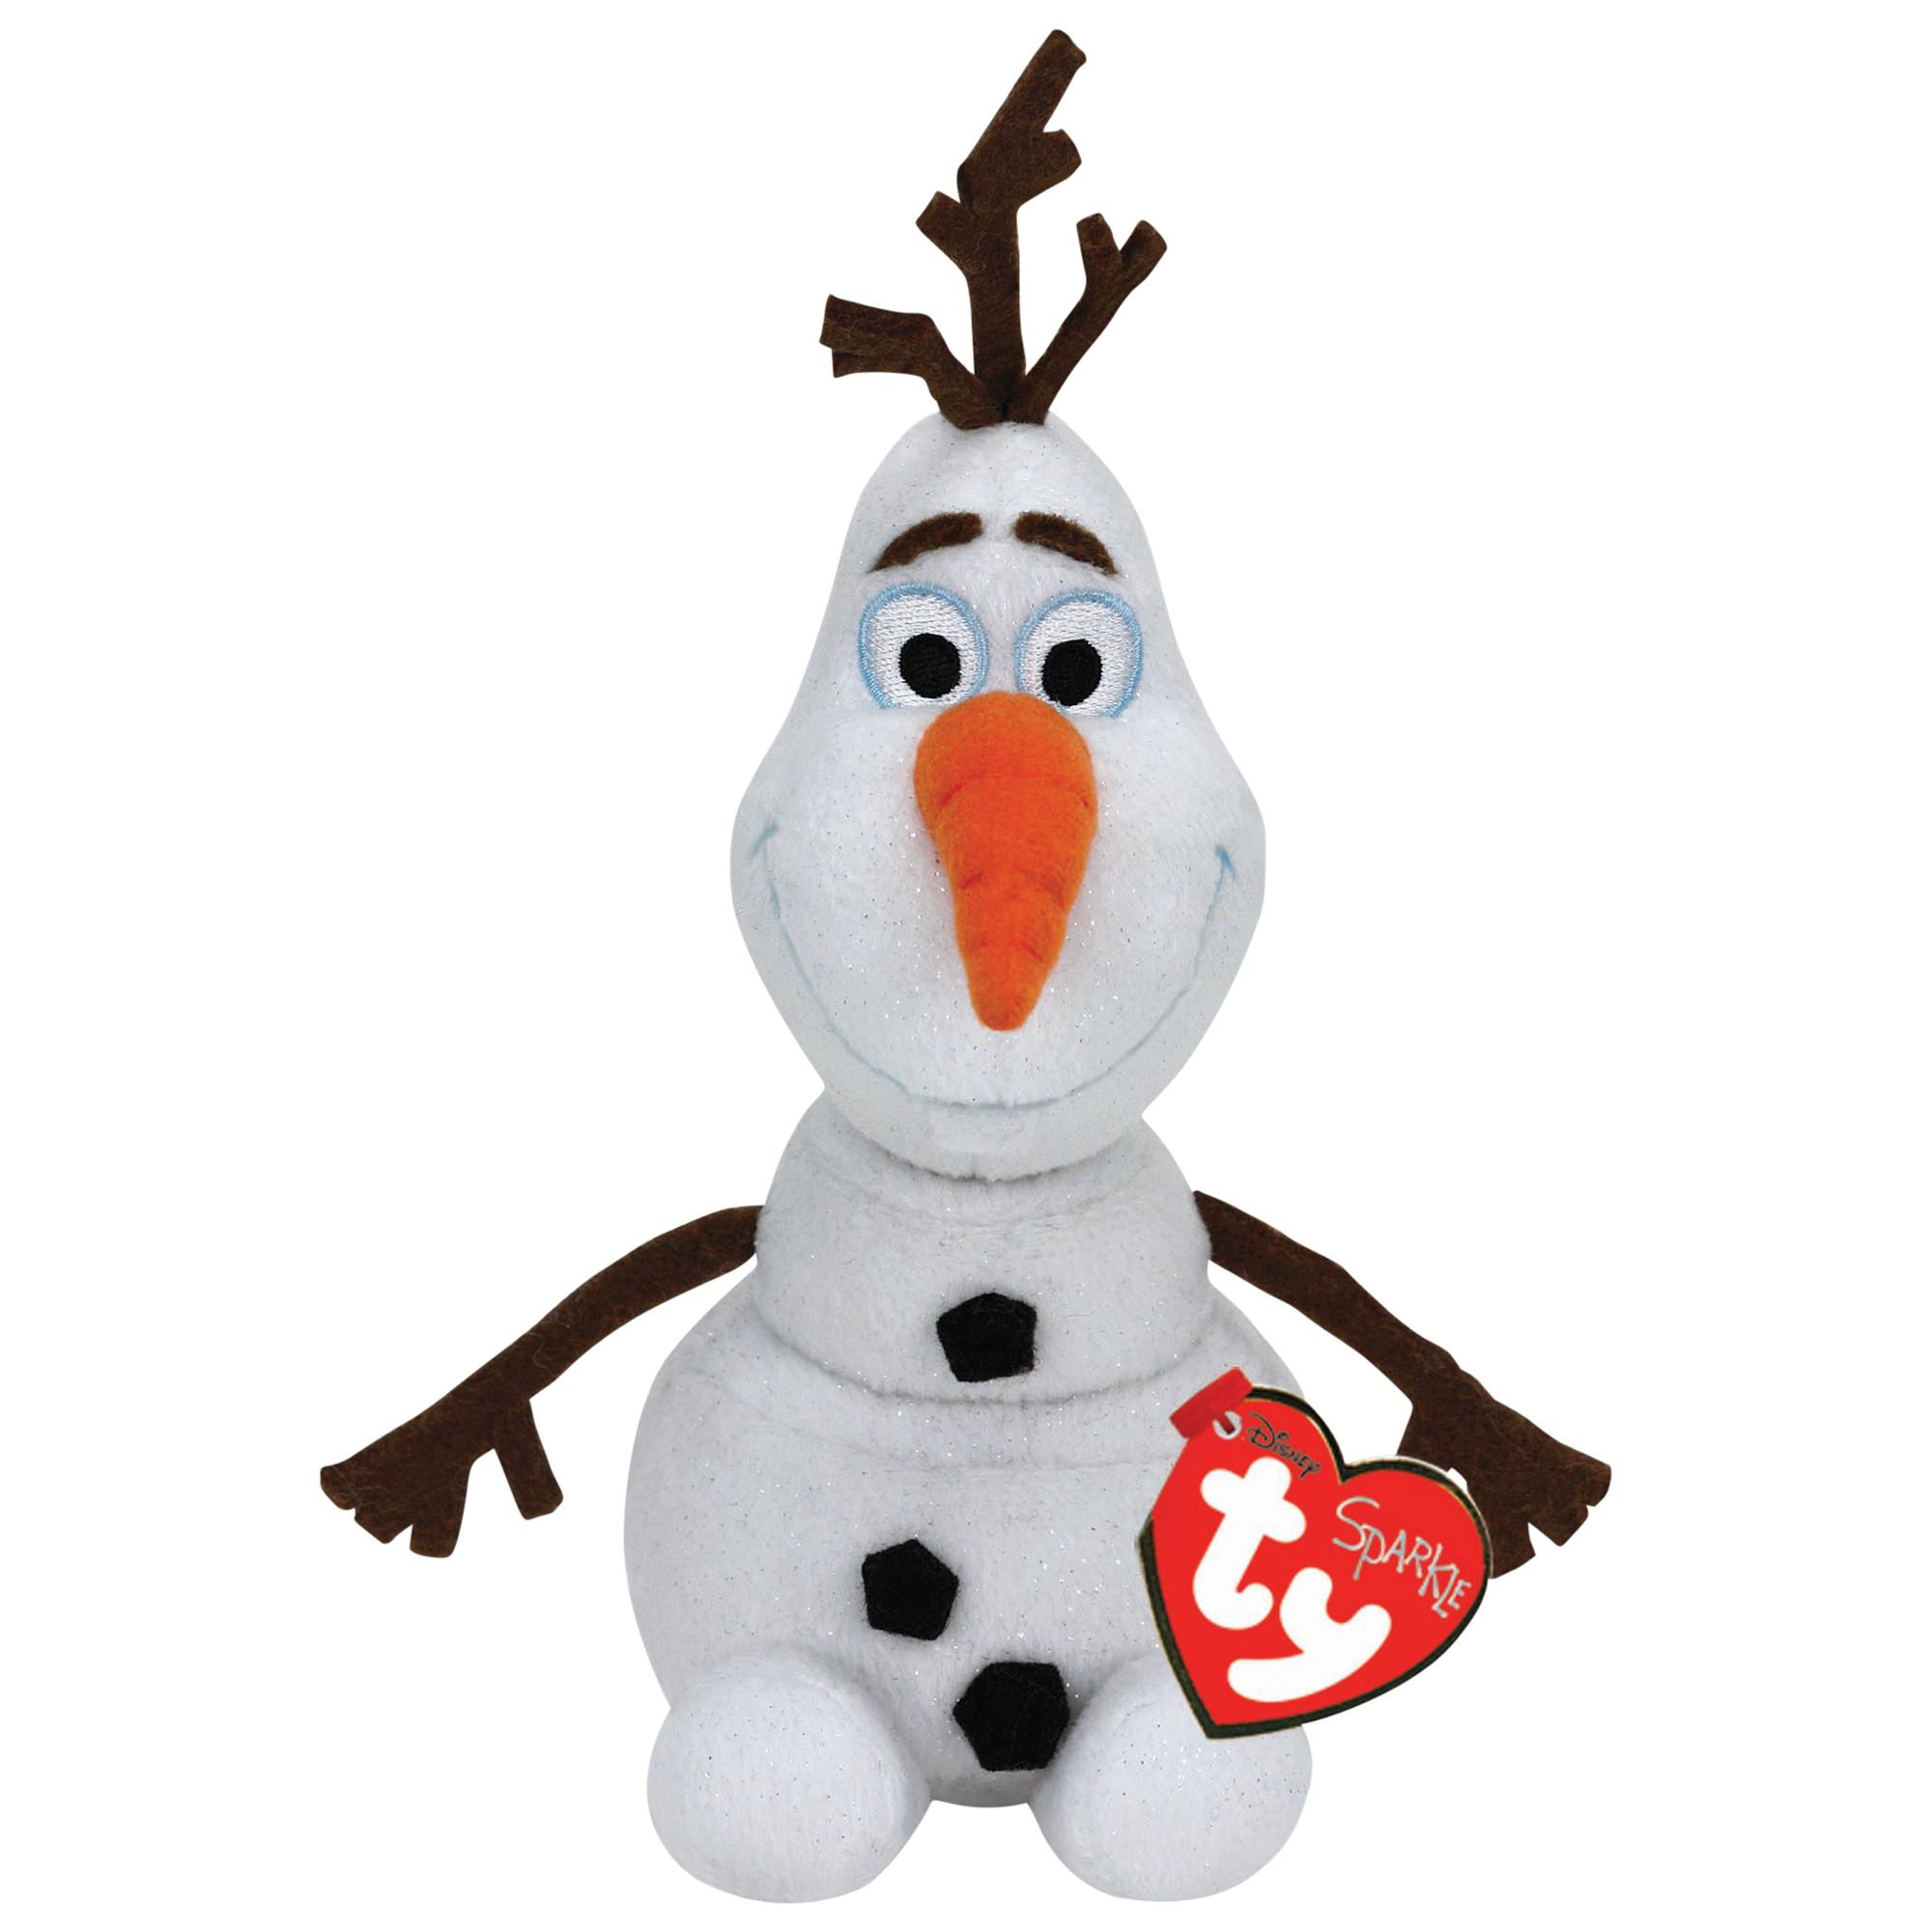 Ty Disney's Frozen Olaf Beanie Soft Toy at John Lewis & Partners